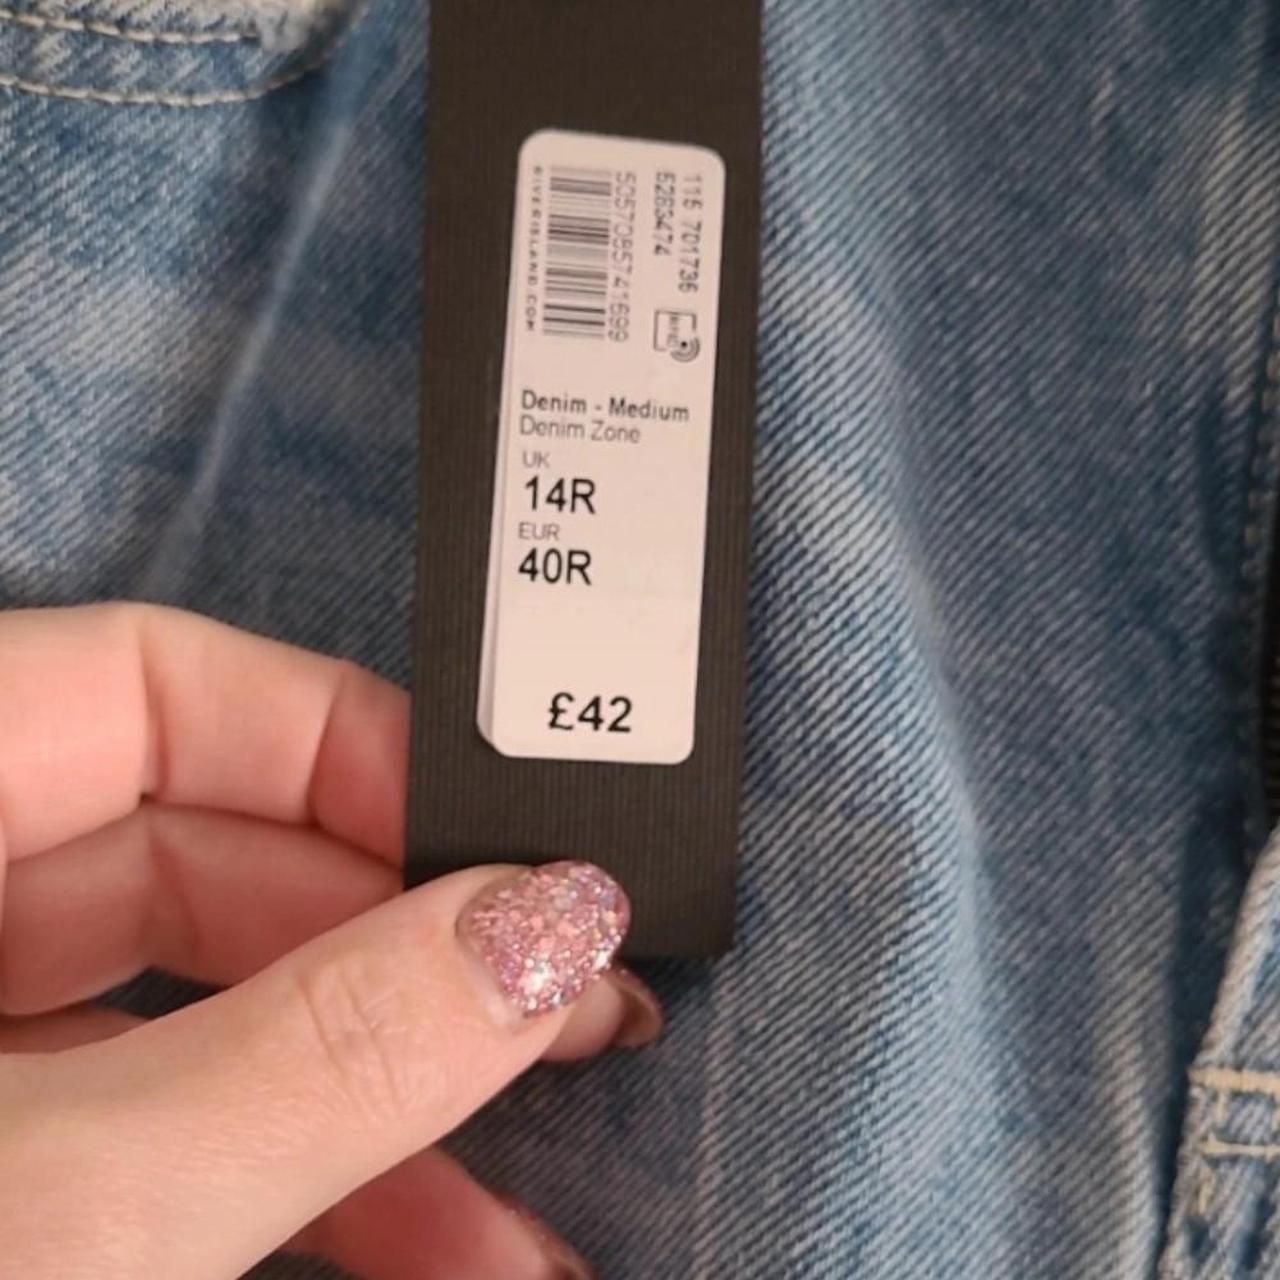 River Island brand new ripped jeans 14R - Depop